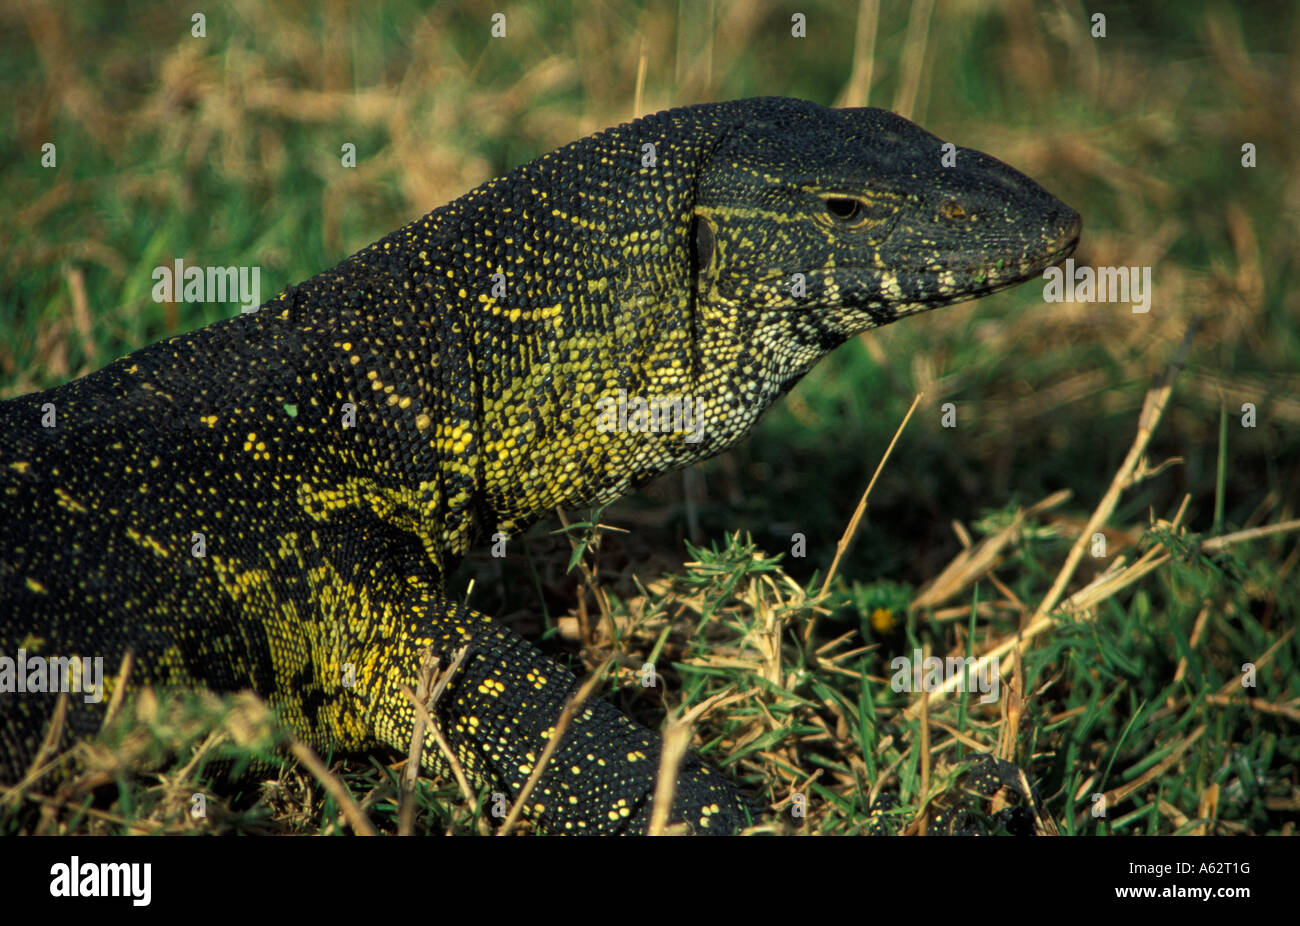 Nile monitor Vanellus niloticus Ngorongoro Crater Tanzanie Banque D'Images